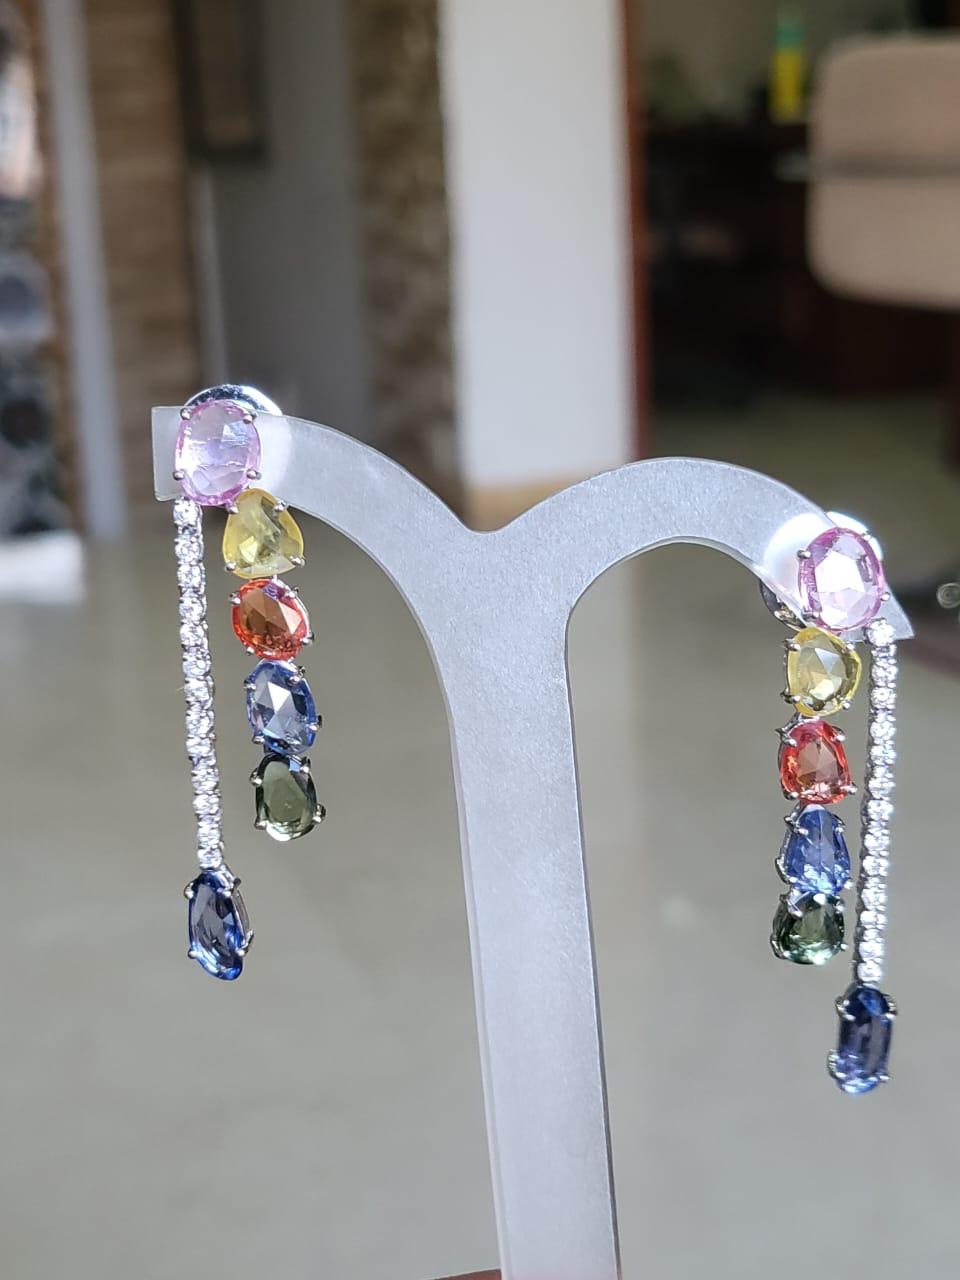 A very beautiful and chic Multi Sapphire Chandelier/ Dangle Earrings set in 18K White Gold & Diamonds. The weight of the Multi Sapphires is 10.11 carats. The Multi Sapphire Rose Cuts are of Ceylon (Sri Lanka) origin. The weight of the Diamonds is